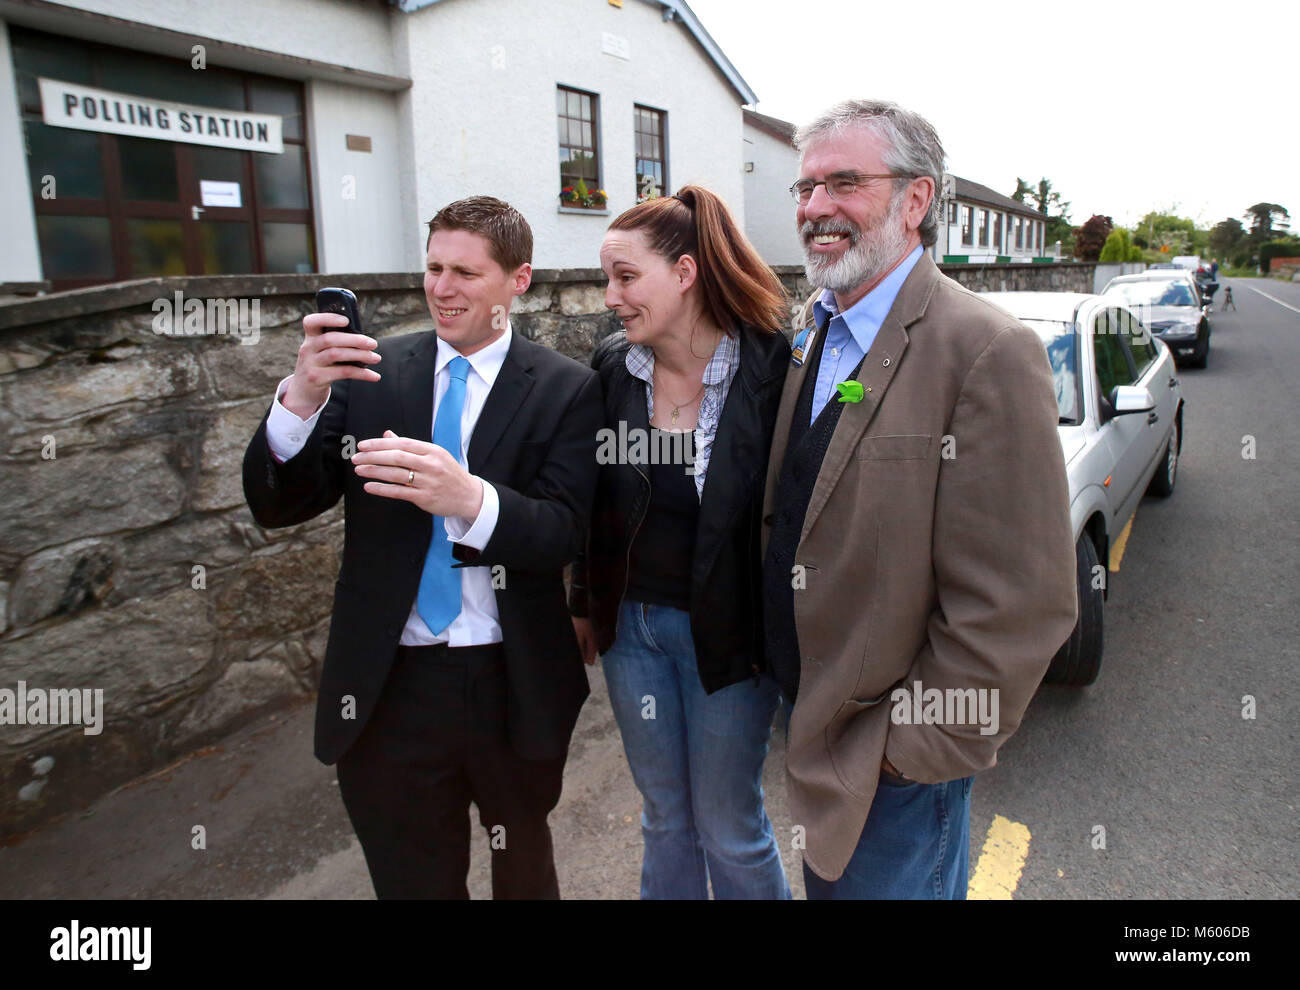 Sinn Fein's Party leader Gerry Adams joins in on a selfie with Matt Carthy, Sinn Fein's Midland & Northwest candidate and voter Lisa McArdle from County Louth outside the Doolargy National School in Ravensdale, County Louth, Ireland,  Friday May 23rd. Polling stations will remain open until 10pm. Almost 2,000 candidates are contesting the 949 local authority seats, while 41 hopefuls are in the race for 11 MEP seats spread over three constituencies while counting has begun in the local elections in Northern Ireland. Over 900 candidates are competing for the 462 seats on 11 new local authorities Stock Photo